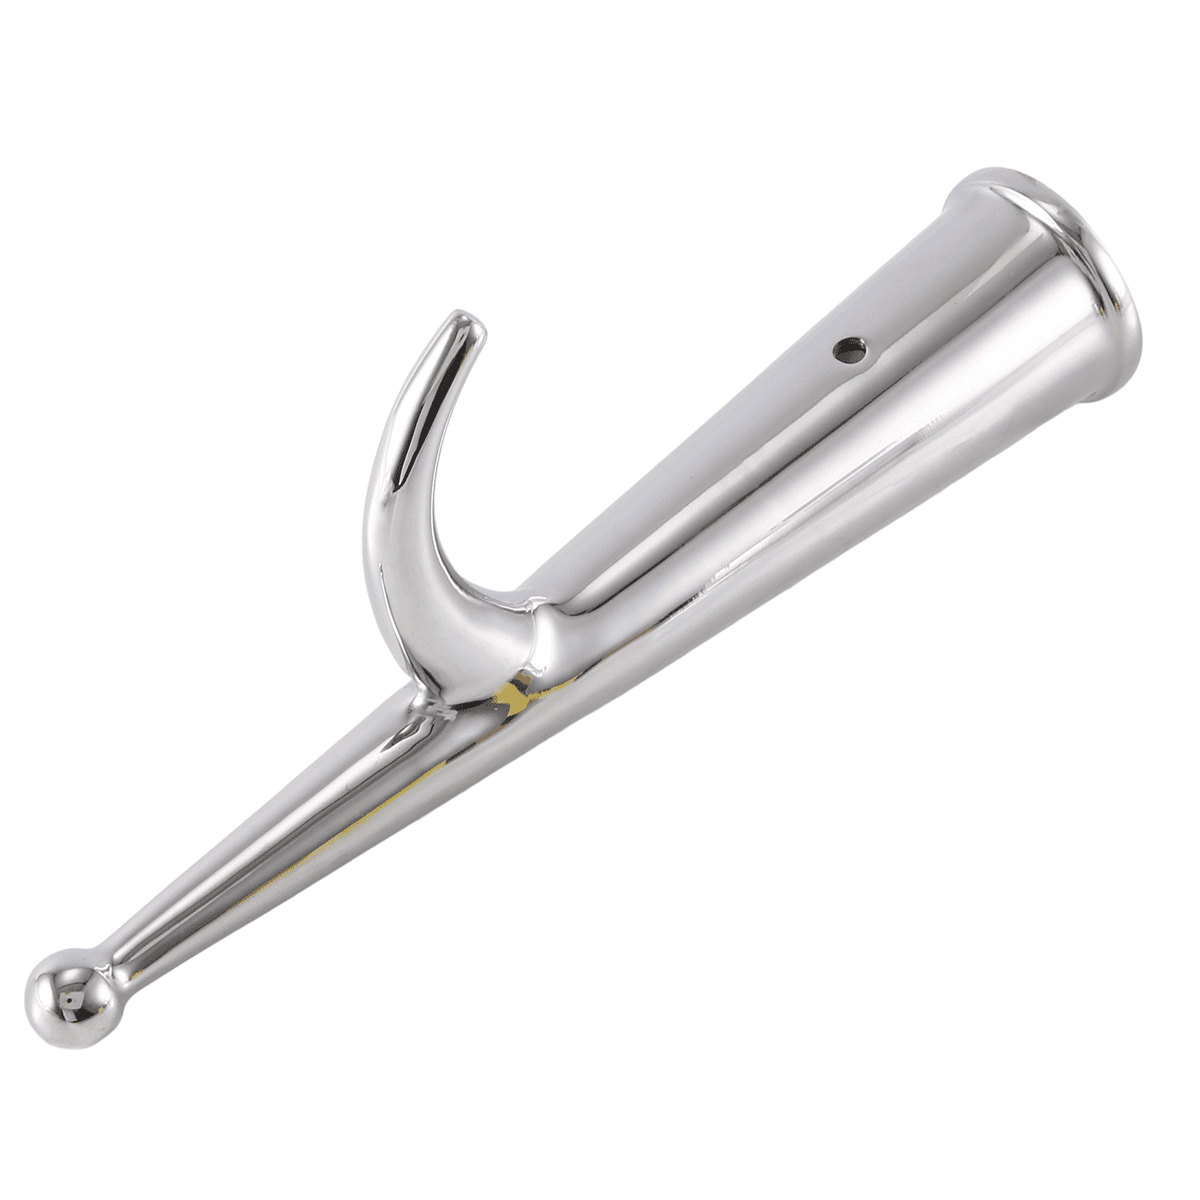 Yacht Boat Railing Stainless Steel 28mm Light Boat Penny Head Stainless  Steel Boat Hook Stop Pick